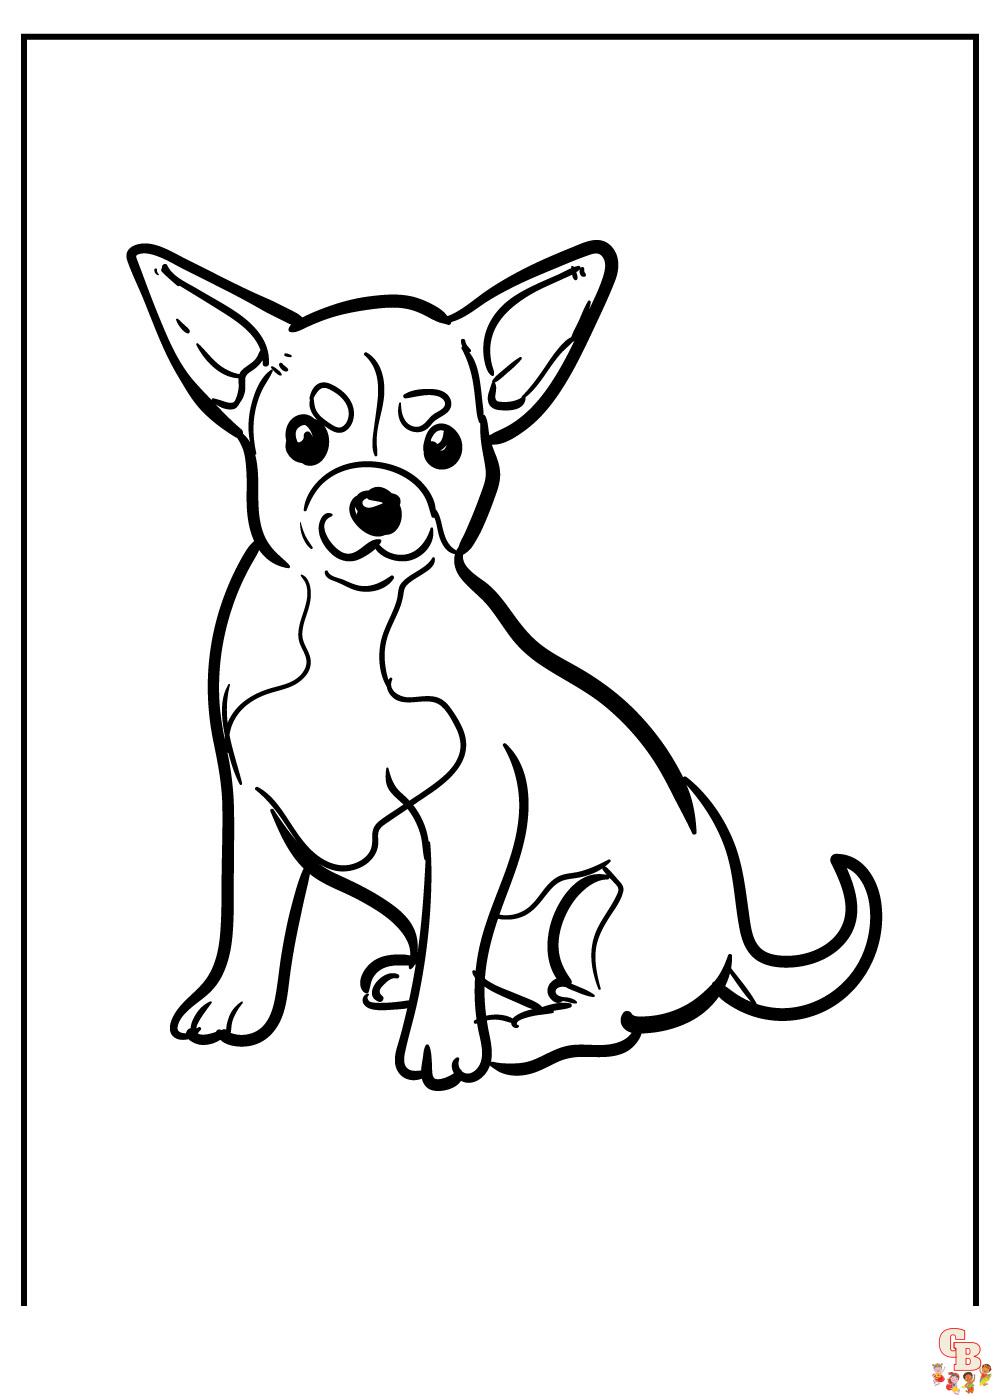 Chihuahua Coloring Pages 10